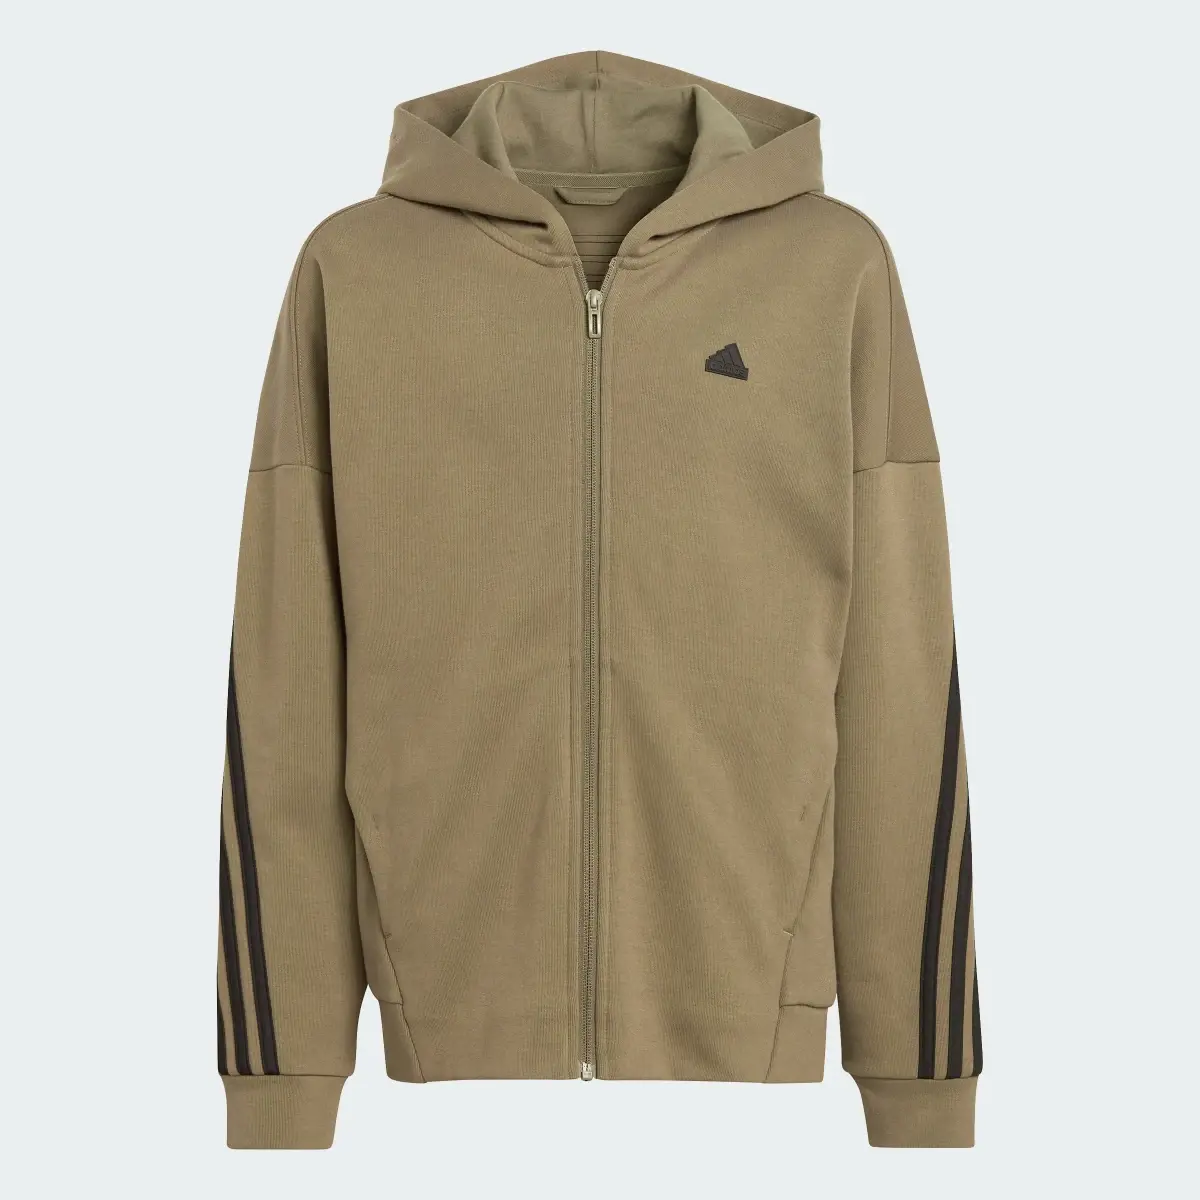 Adidas Future Icons 3-Stripes Full-Zip Hooded Track Top. 3